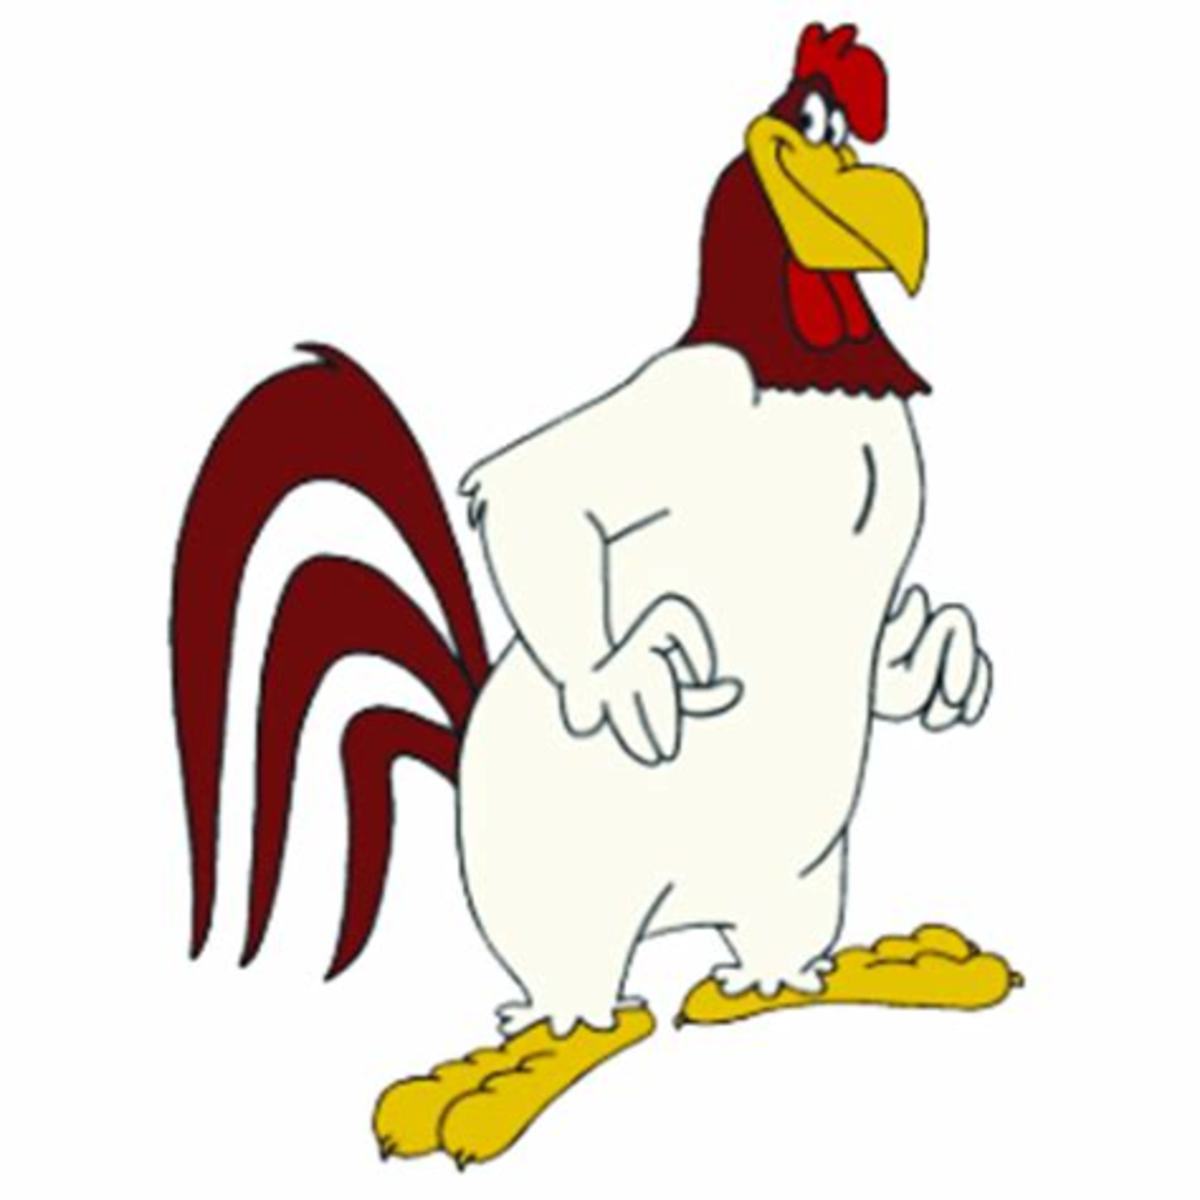 "There's a whole lotta, I say, I say...a whole lotta colludin' going on 'round here." - Foghorn Leghorn